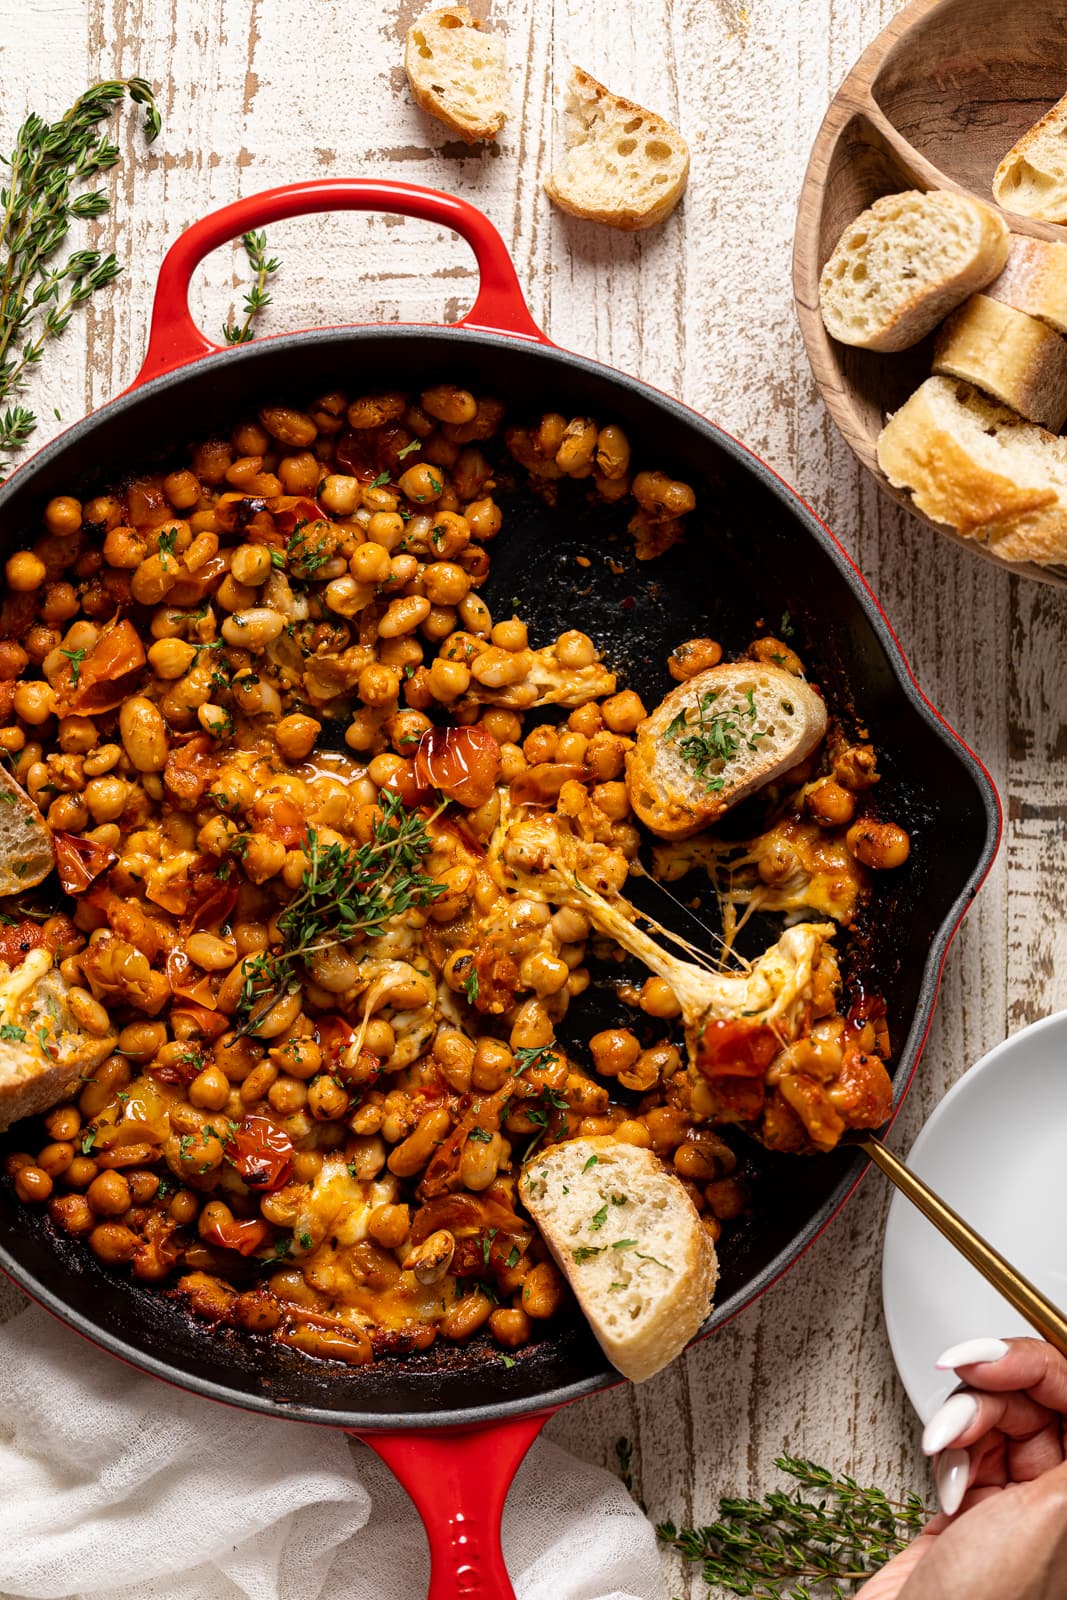 Overhead shot of a skillet of Saucy Baked Chickpea and White Beans